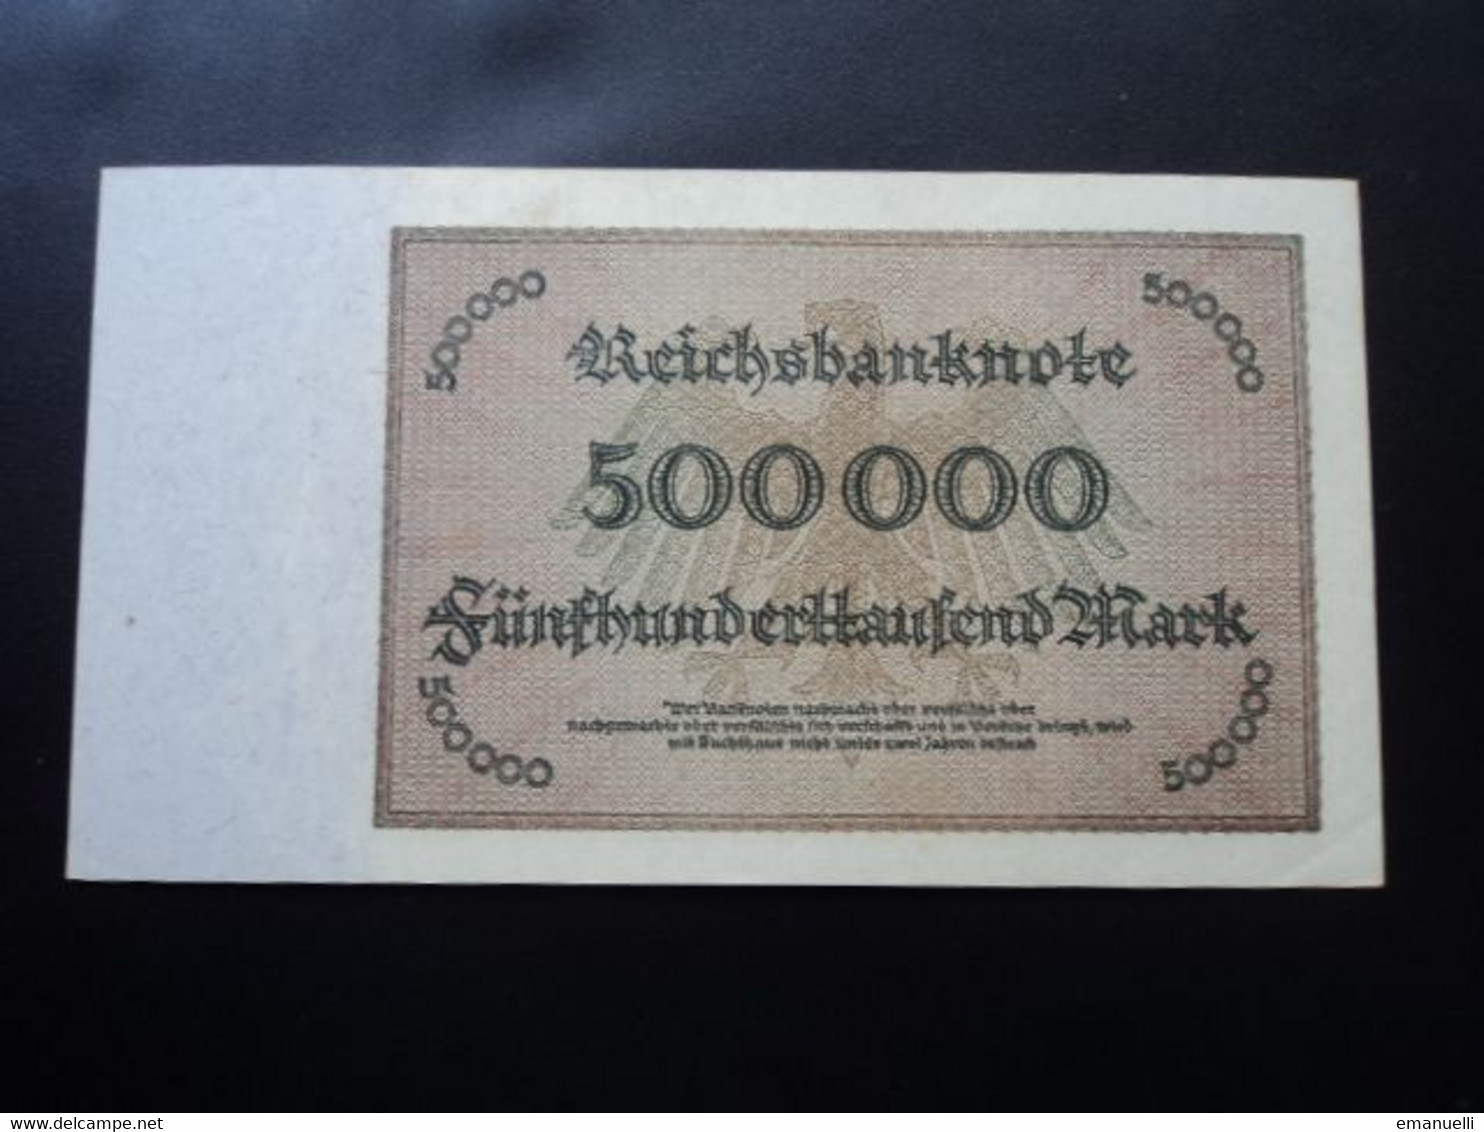 ALLEMAGNE * : 500 000  MARK   1.5.1923     CA 87f,  ** / P 88b     SUP+ - 500.000 Mark